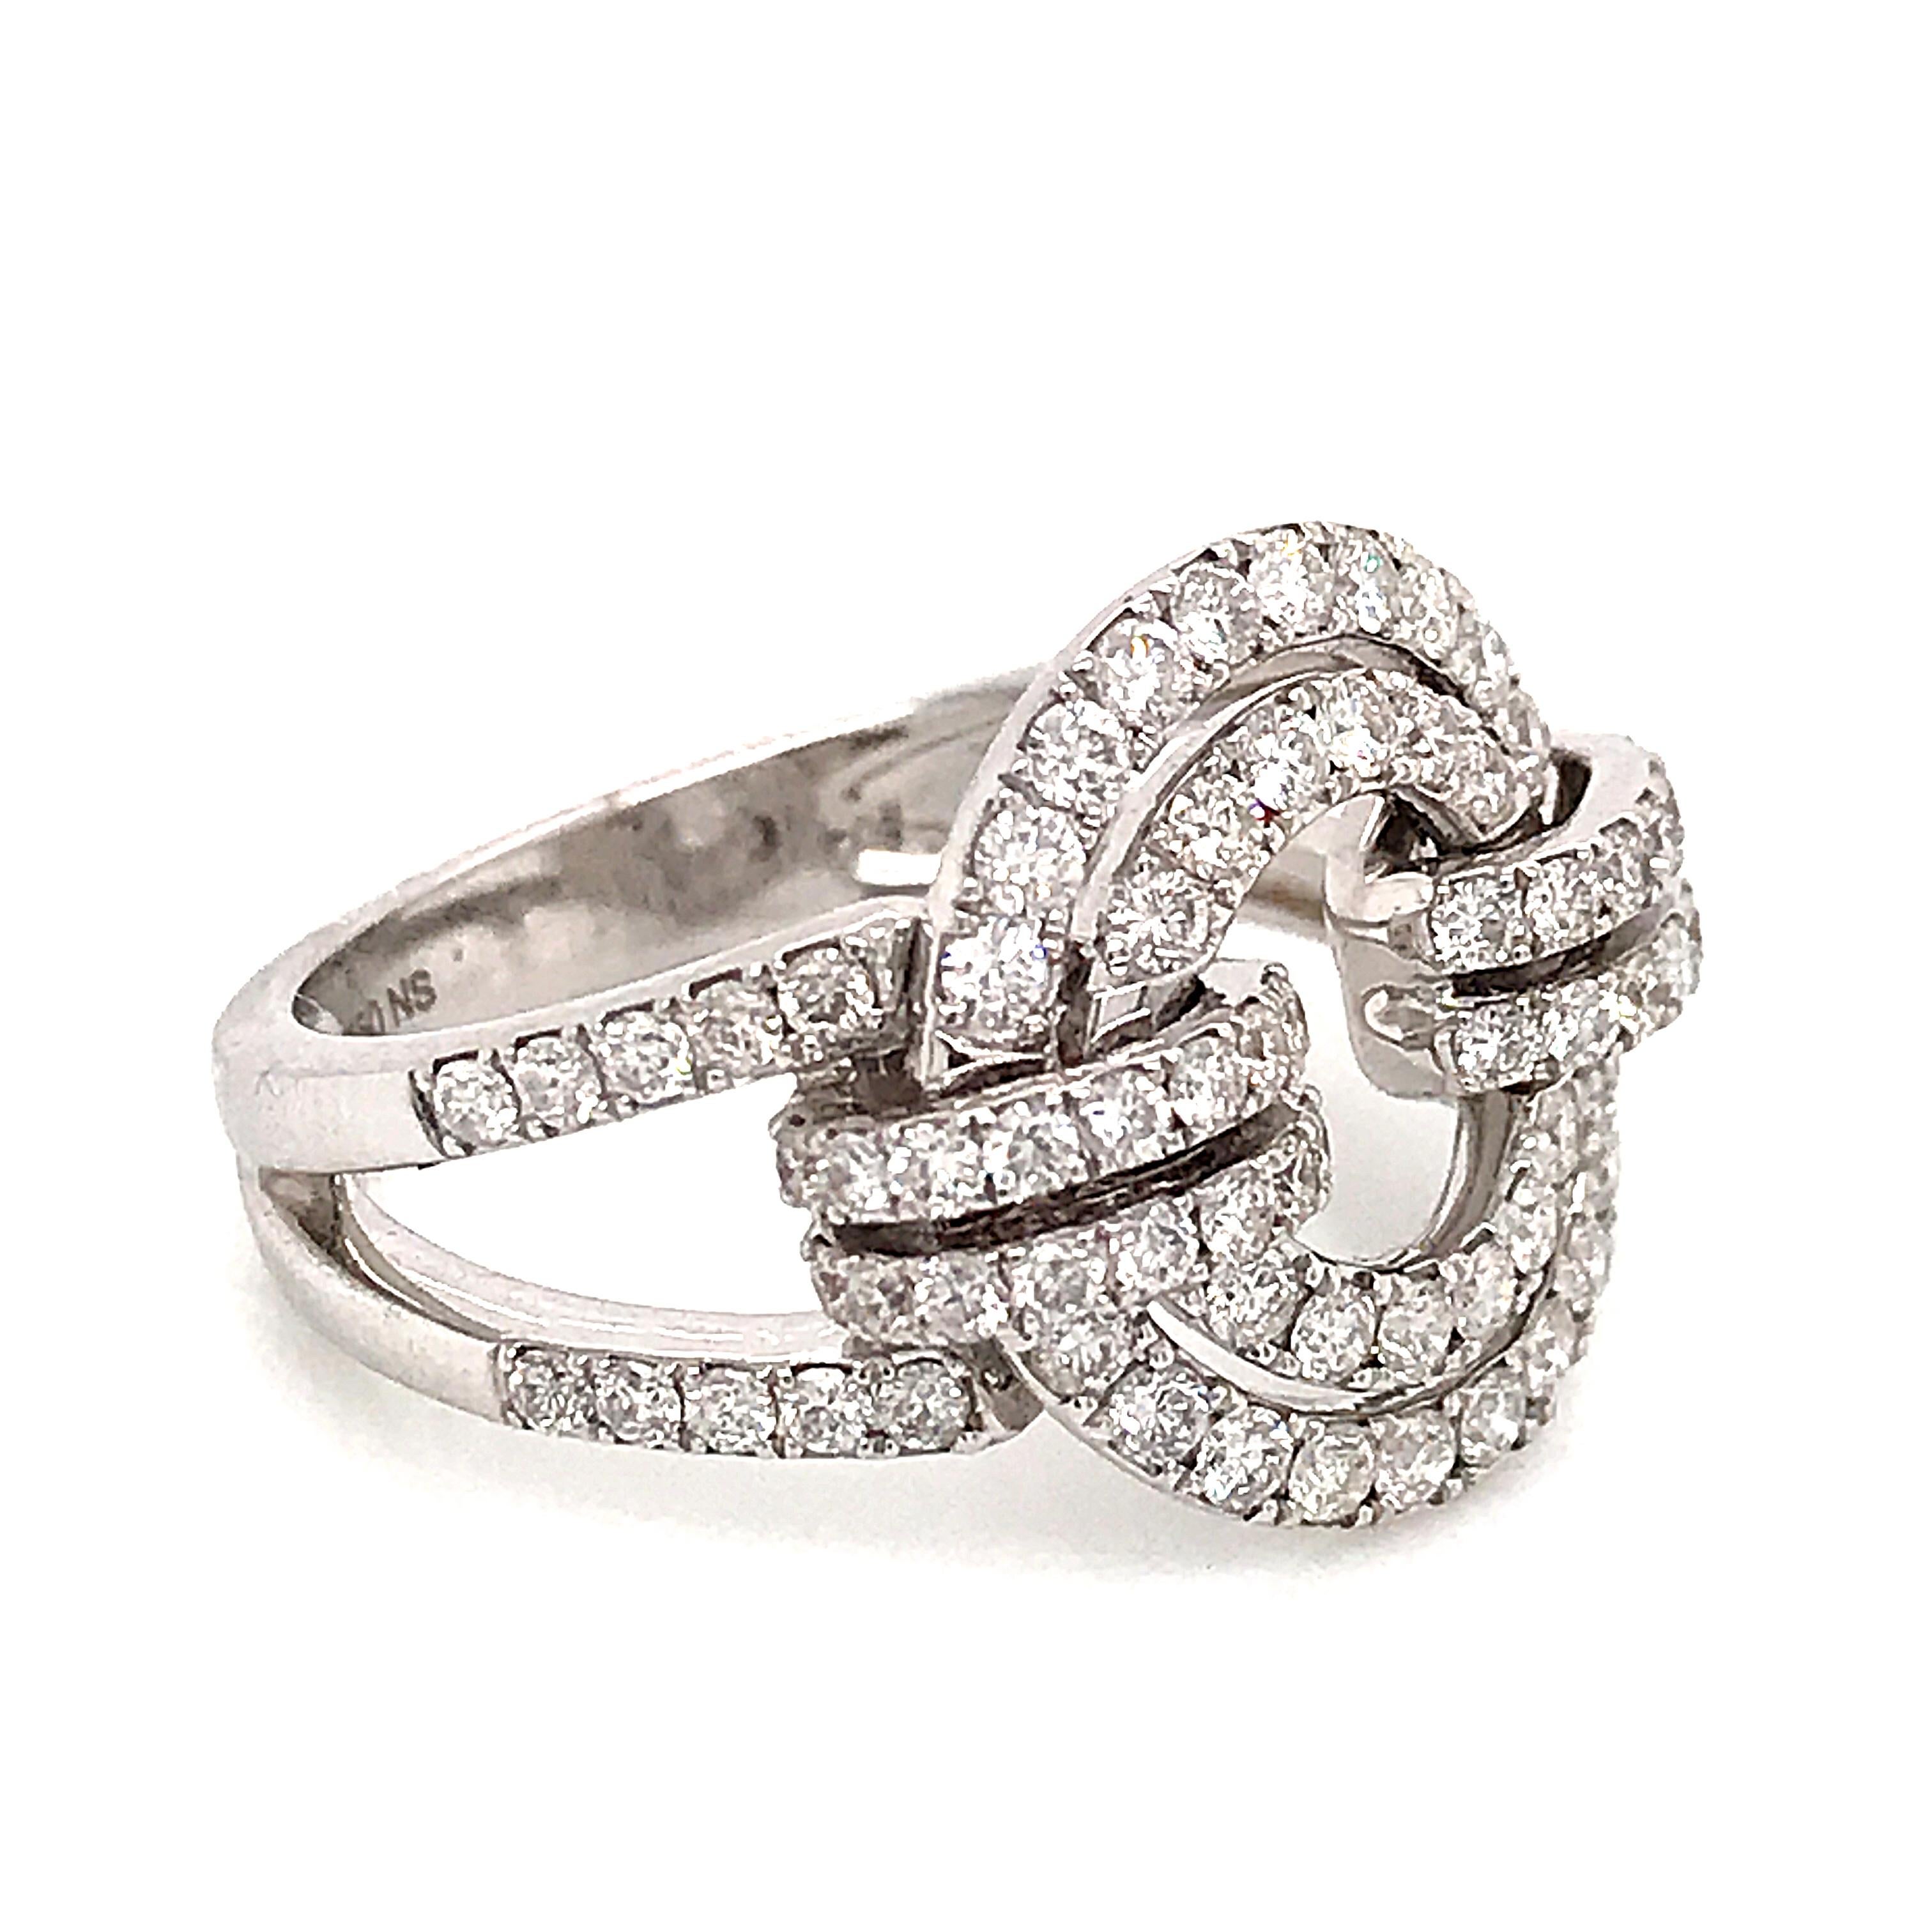 Contemporary White Diamonds and White Gold 18 Karat Articulated Circle Ring